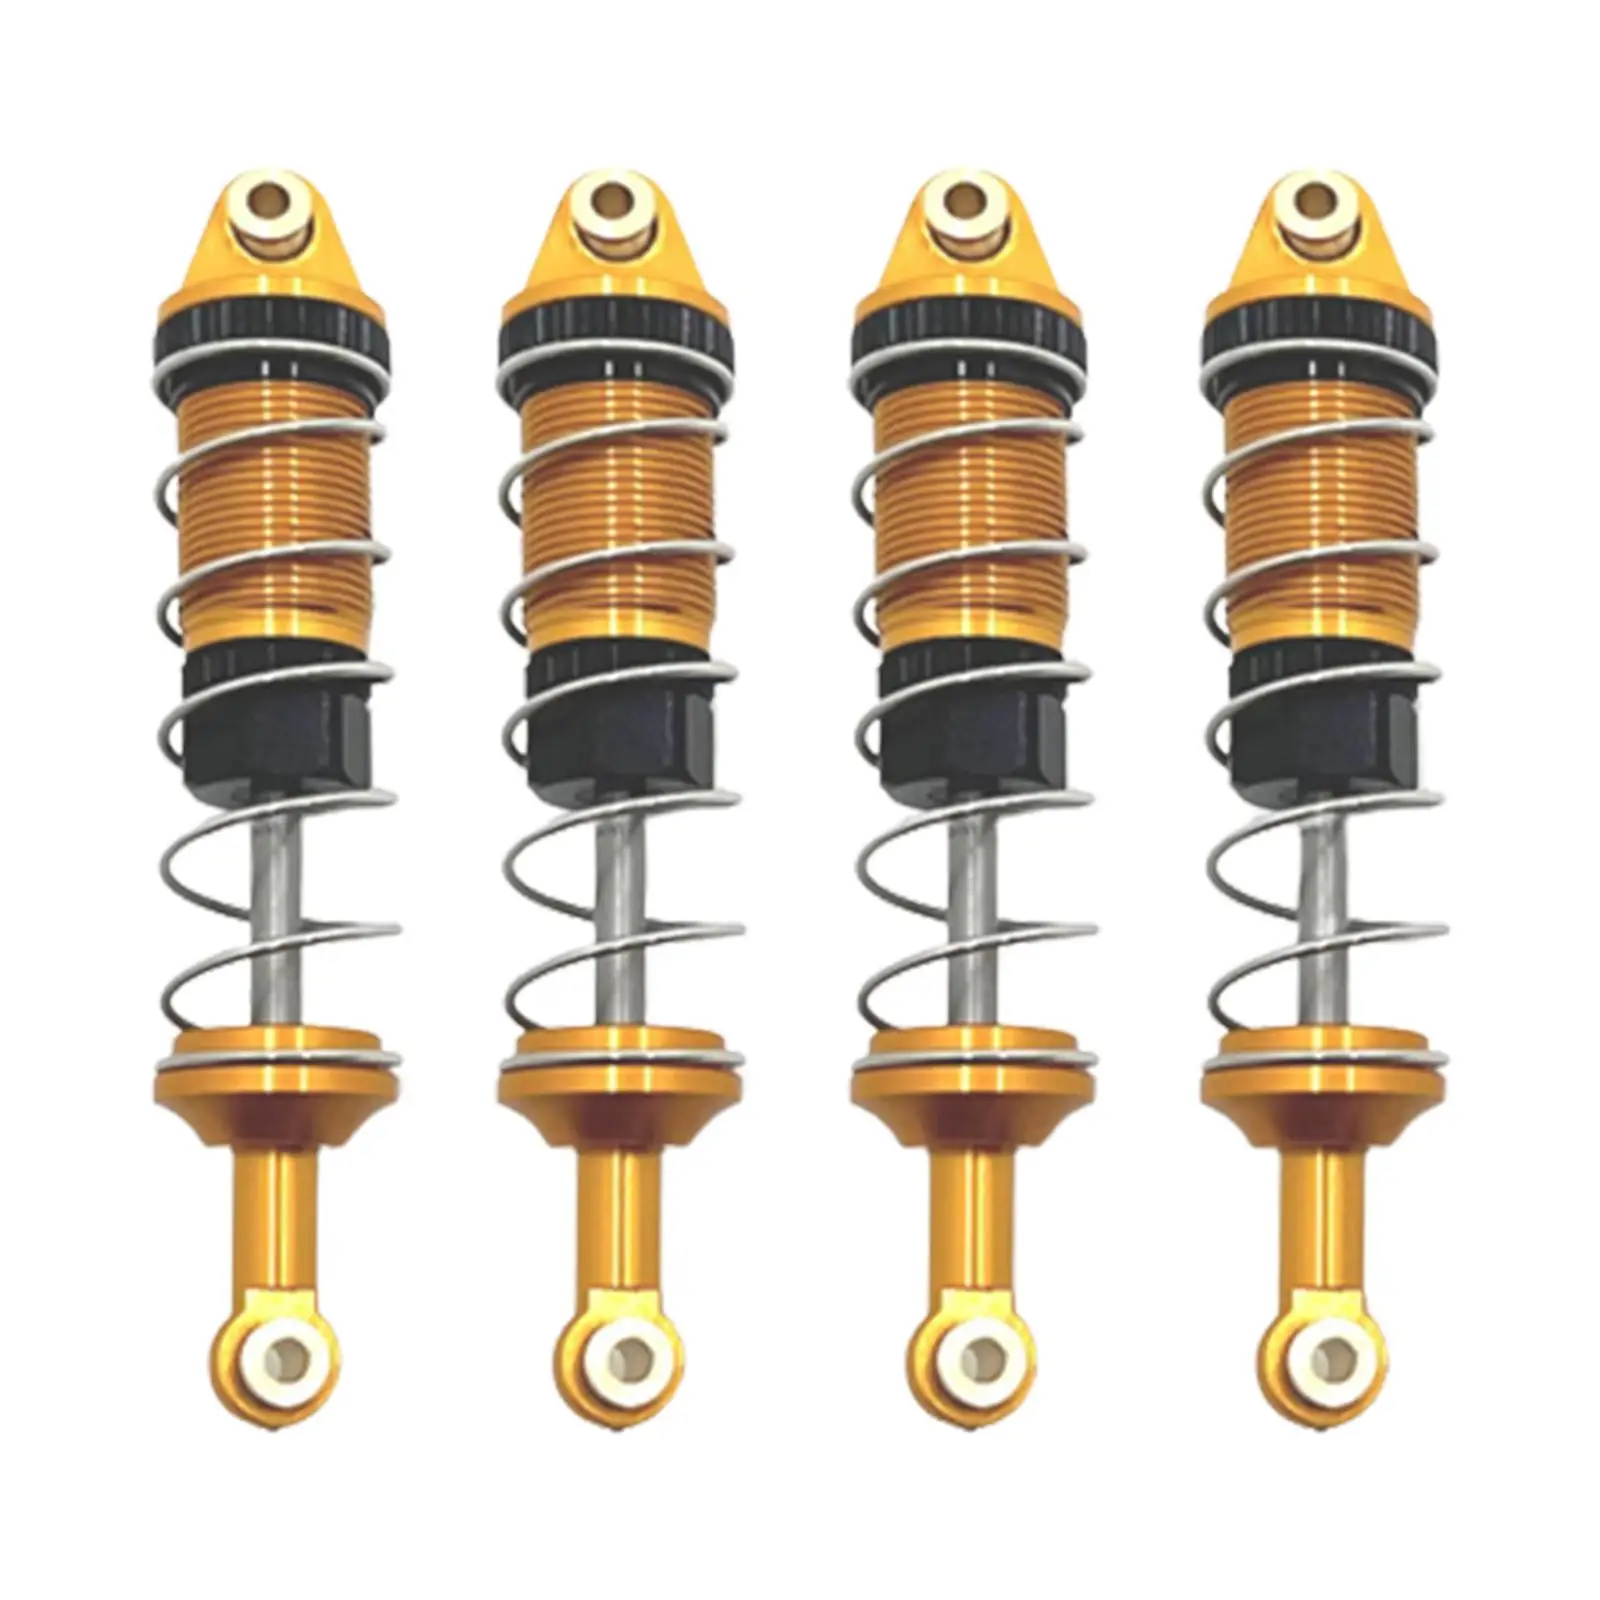 4 Pieces RC Car Shock Absorber Front and Rear RC Shocks Damper Upgrade Parts for 16207 16210 H6 1:16 Vehicles RC Car